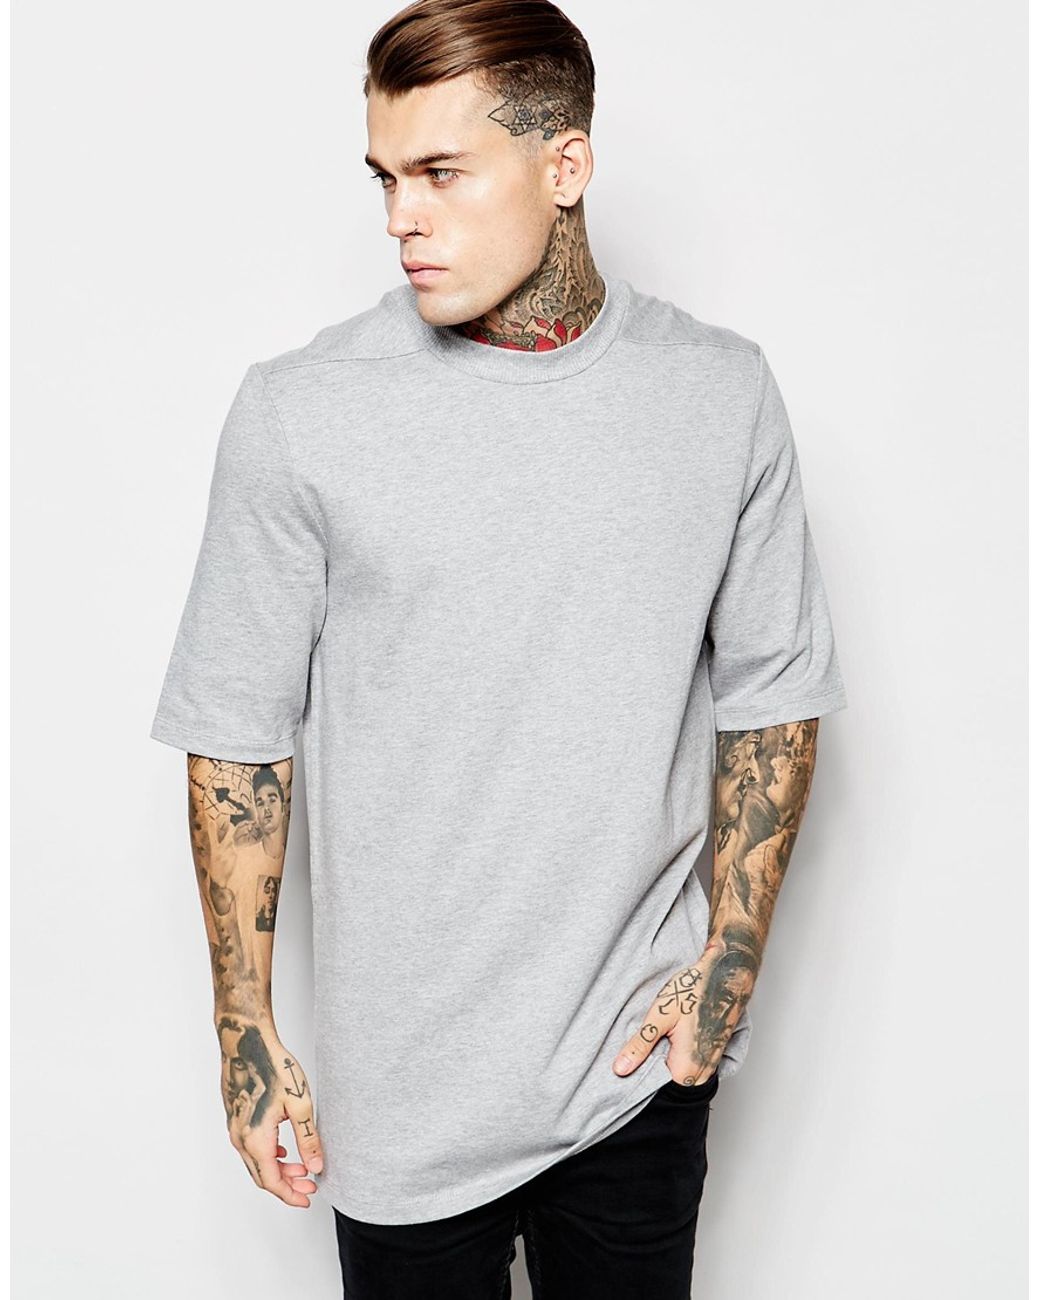 https://cdna.lystit.com/1040/1300/n/photos/1d4f-2015/09/25/asos-grey-super-longline-t-shirt-with-half-sleeve-and-high-neck-with-seam-detail-gray-product-2-187119090-normal.jpeg